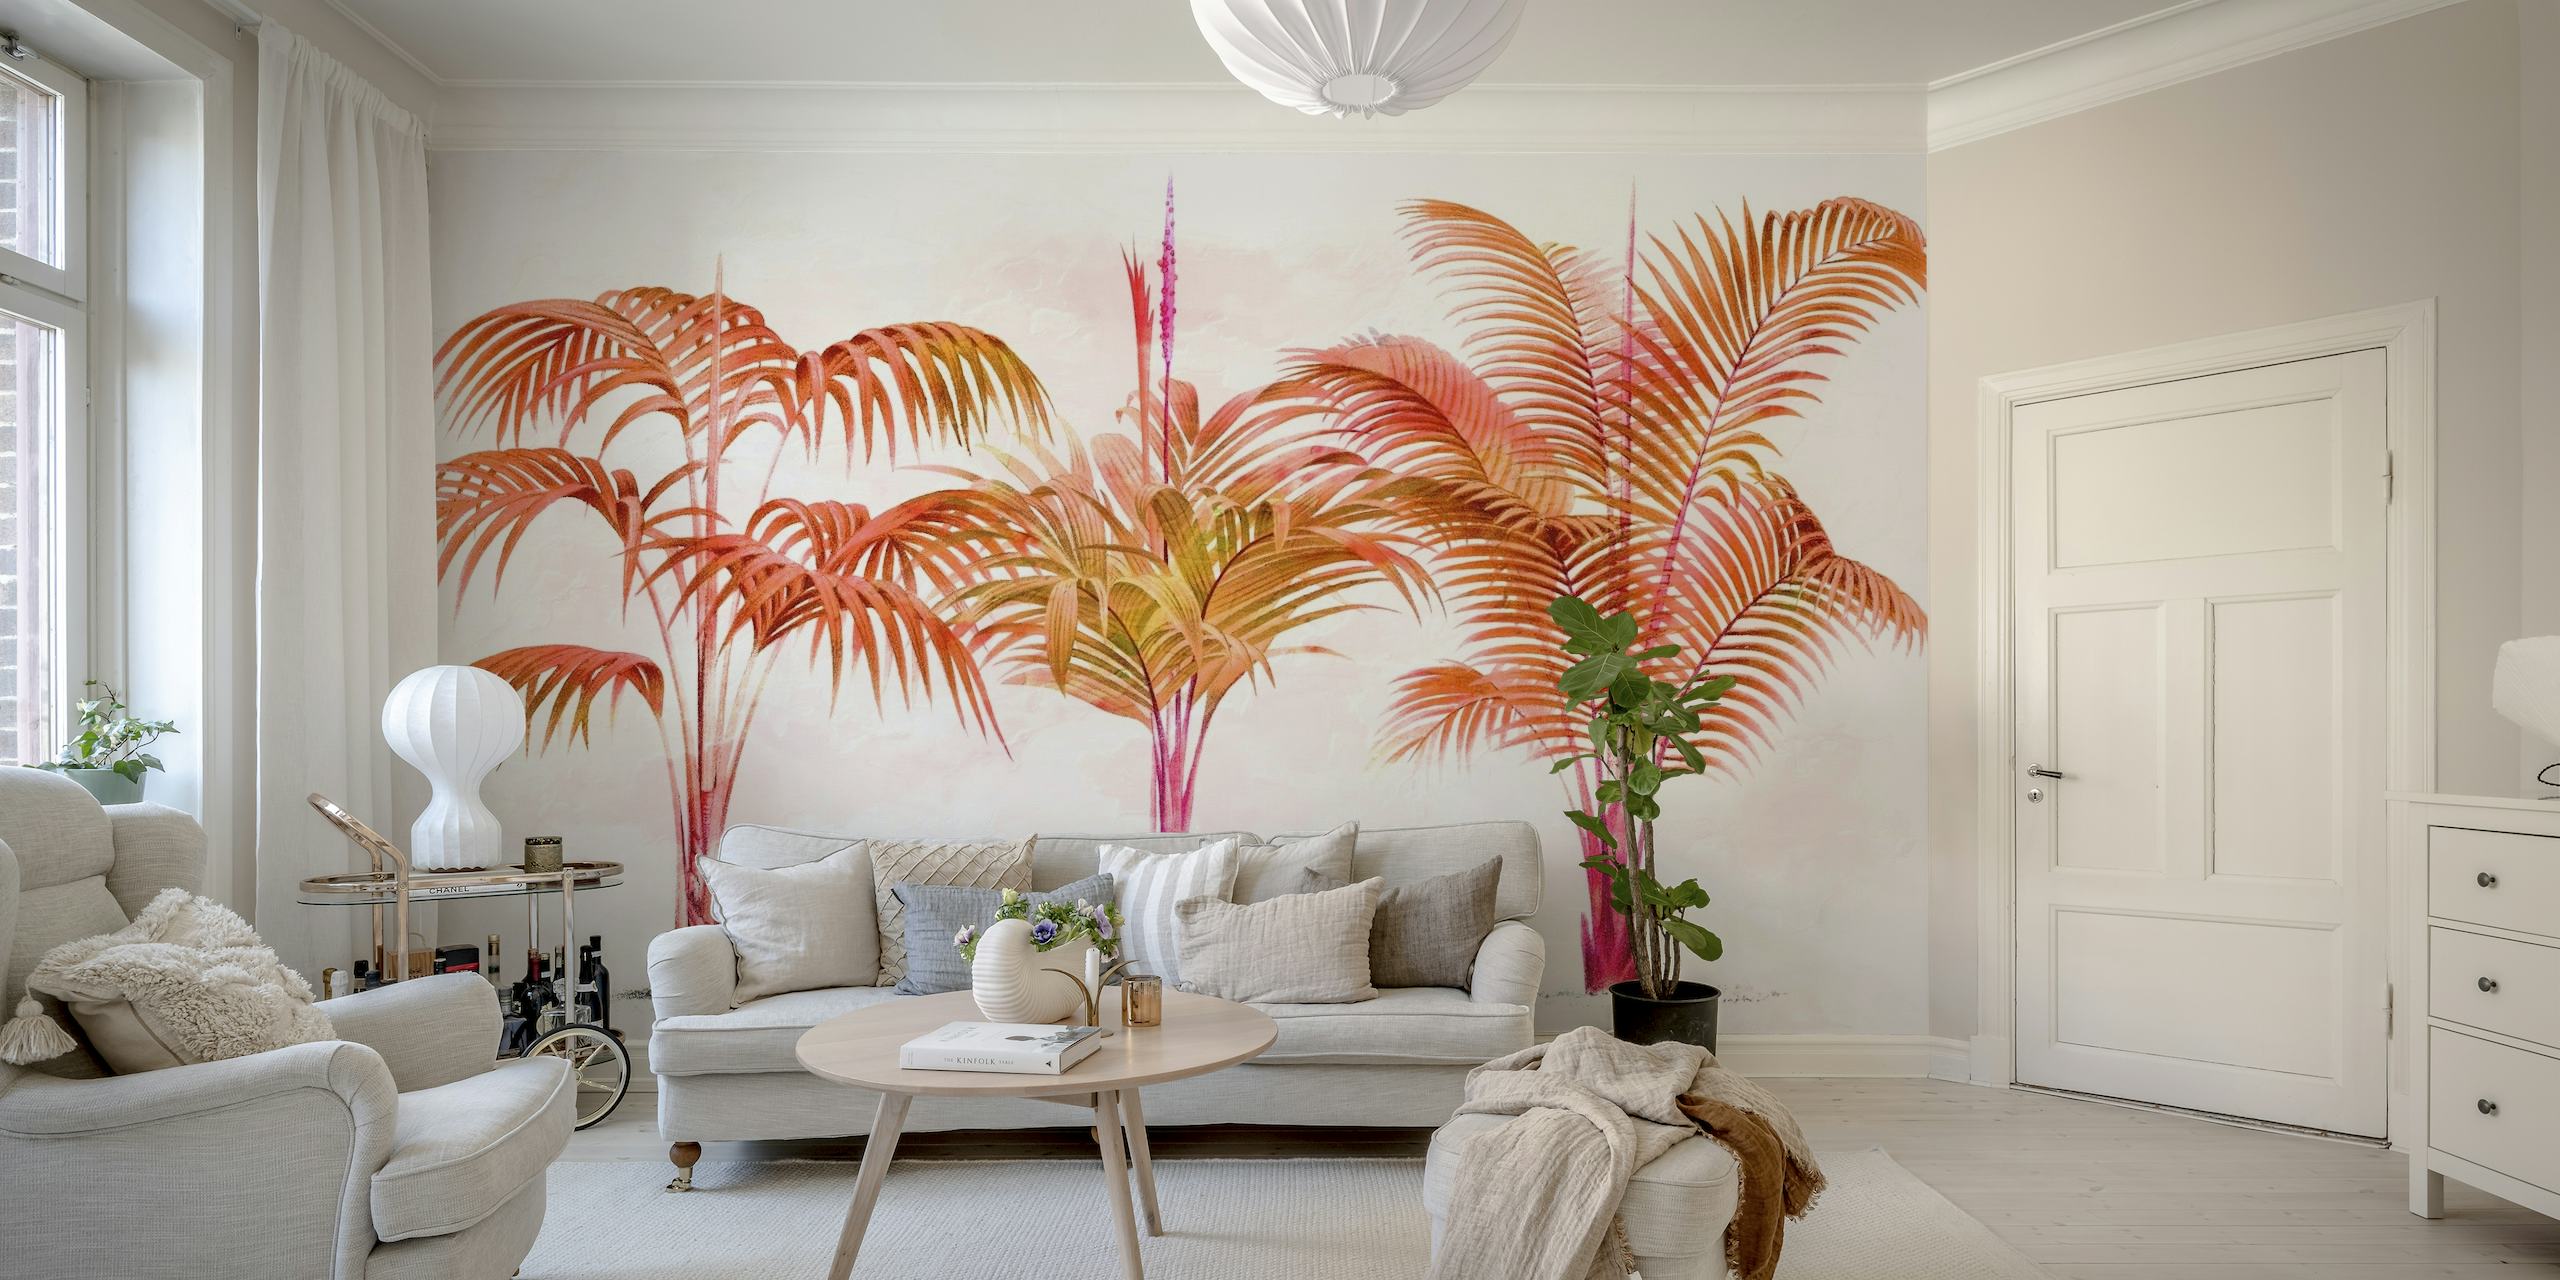 Soothing palm tree wall mural in warm tones.